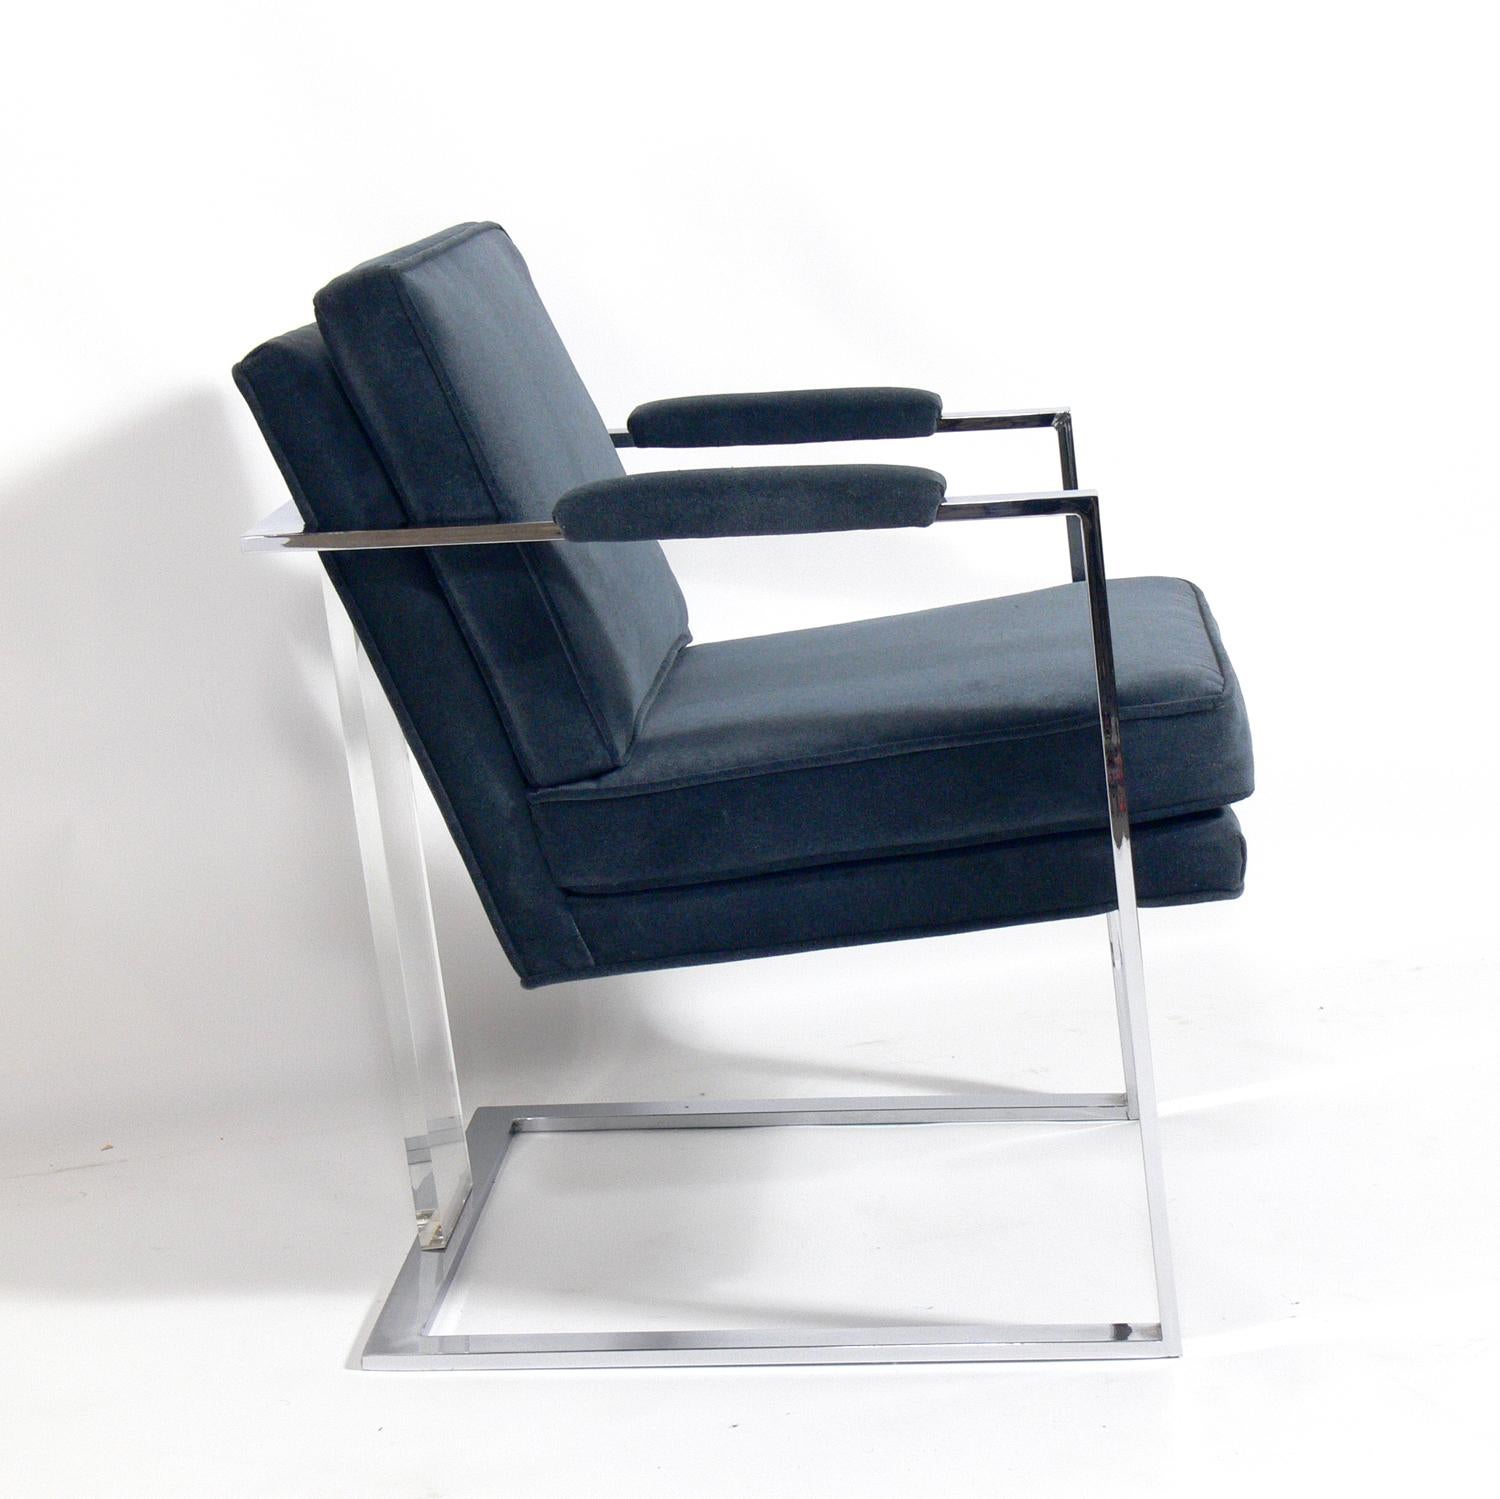 Midcentury chrome and Lucite lounge chair, attributed to Milo Baughman, American, circa 1960s. This chair has been recently reupholstered in a velvety slate blue color upholstery.